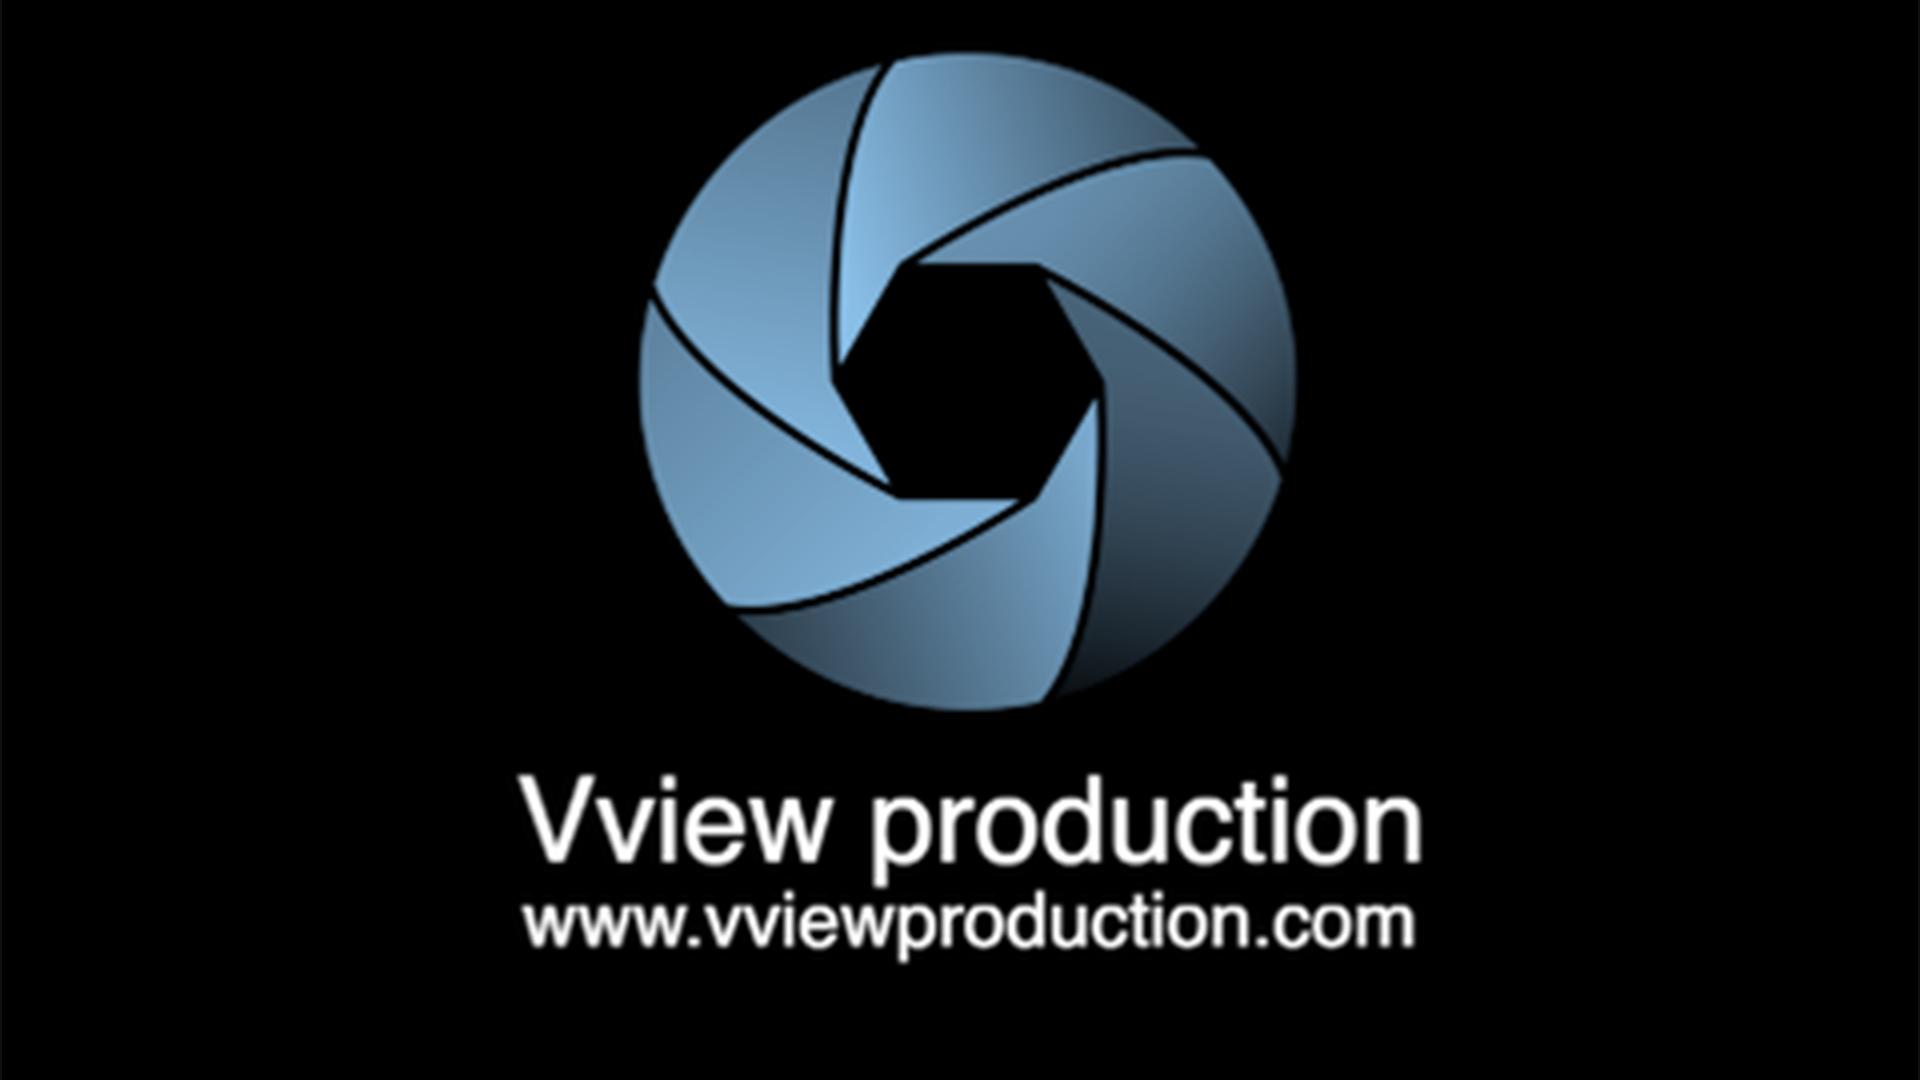 Vview production